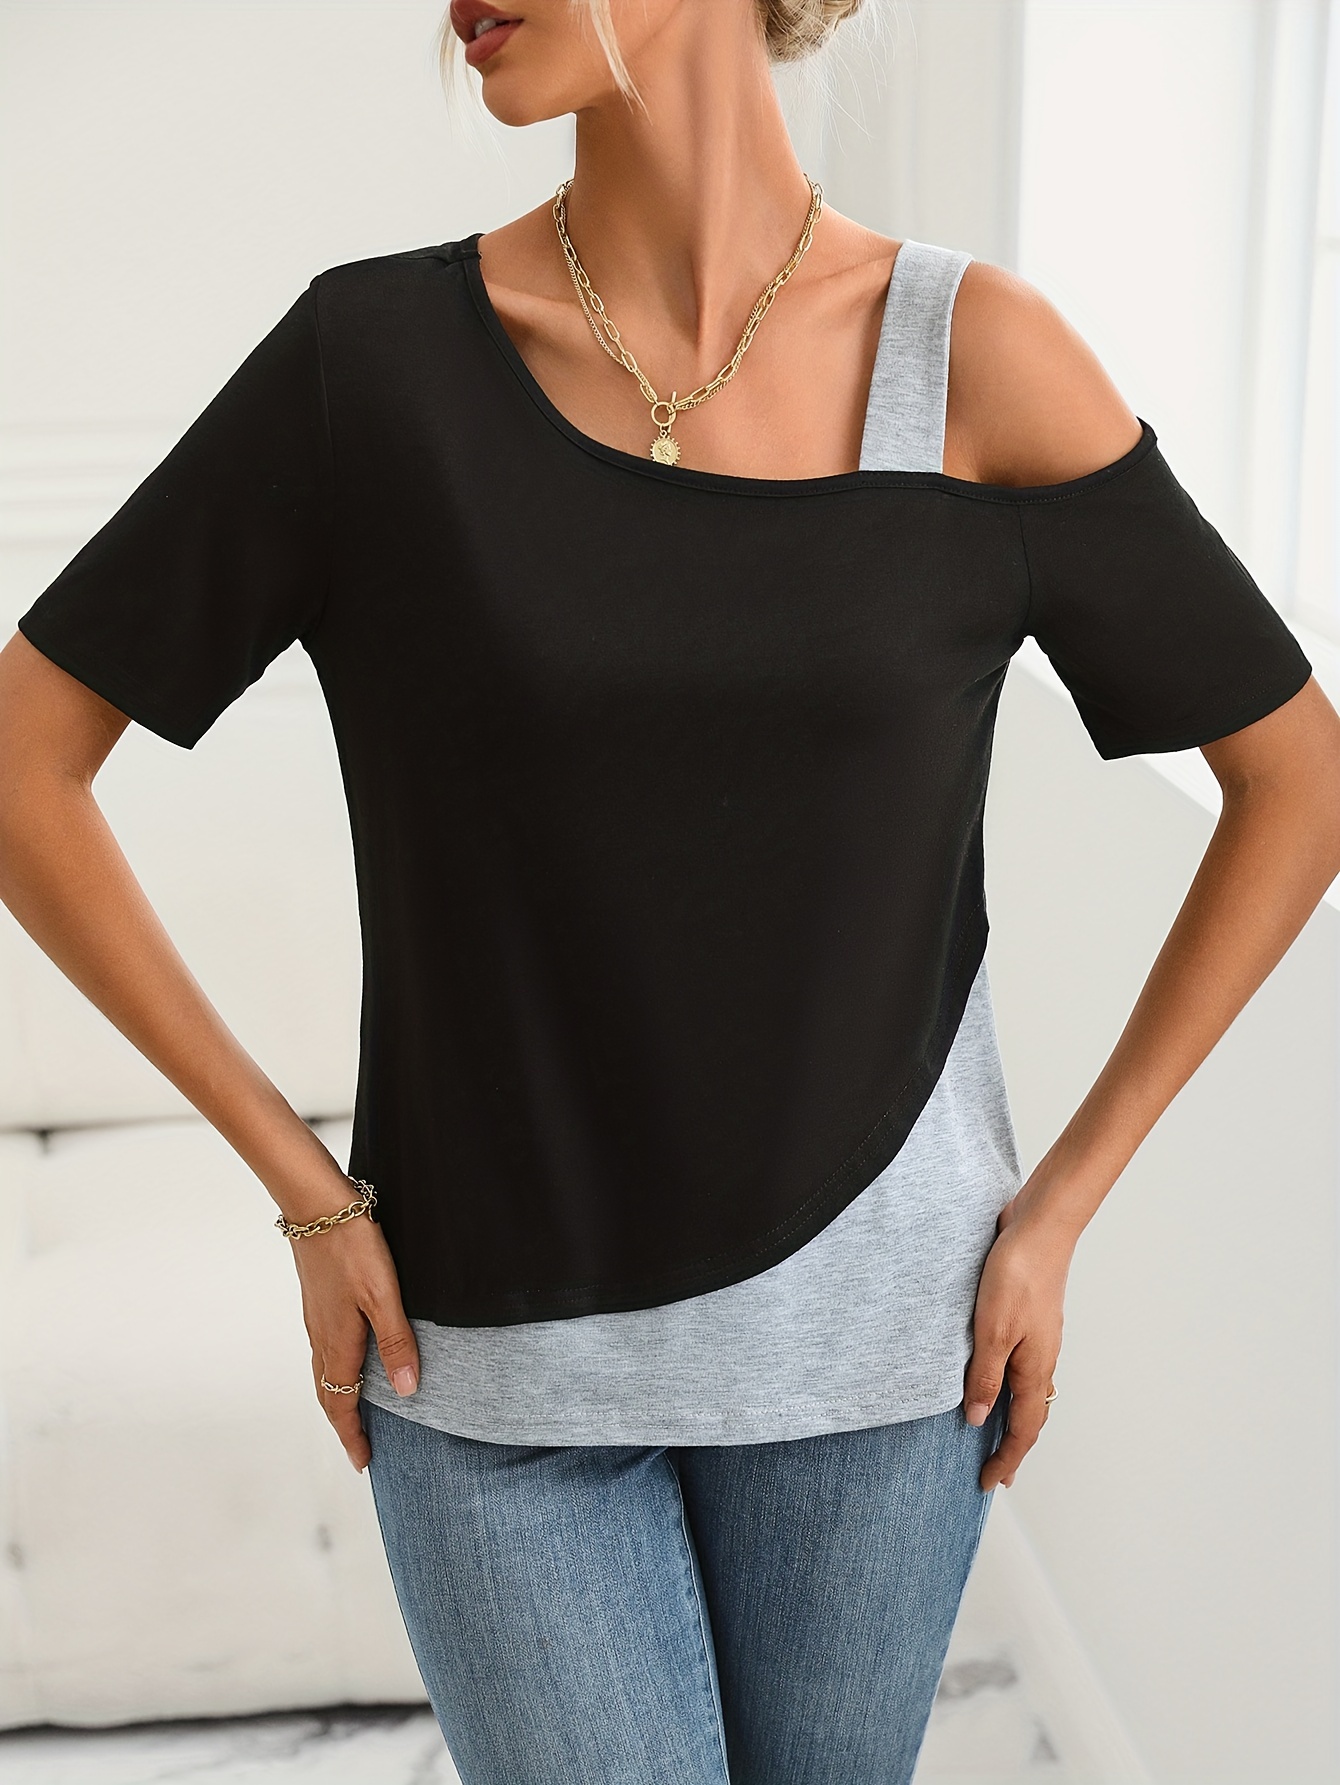 Women Button Ruched One Sided Cold Shoulder Blouse Tops T Shirts